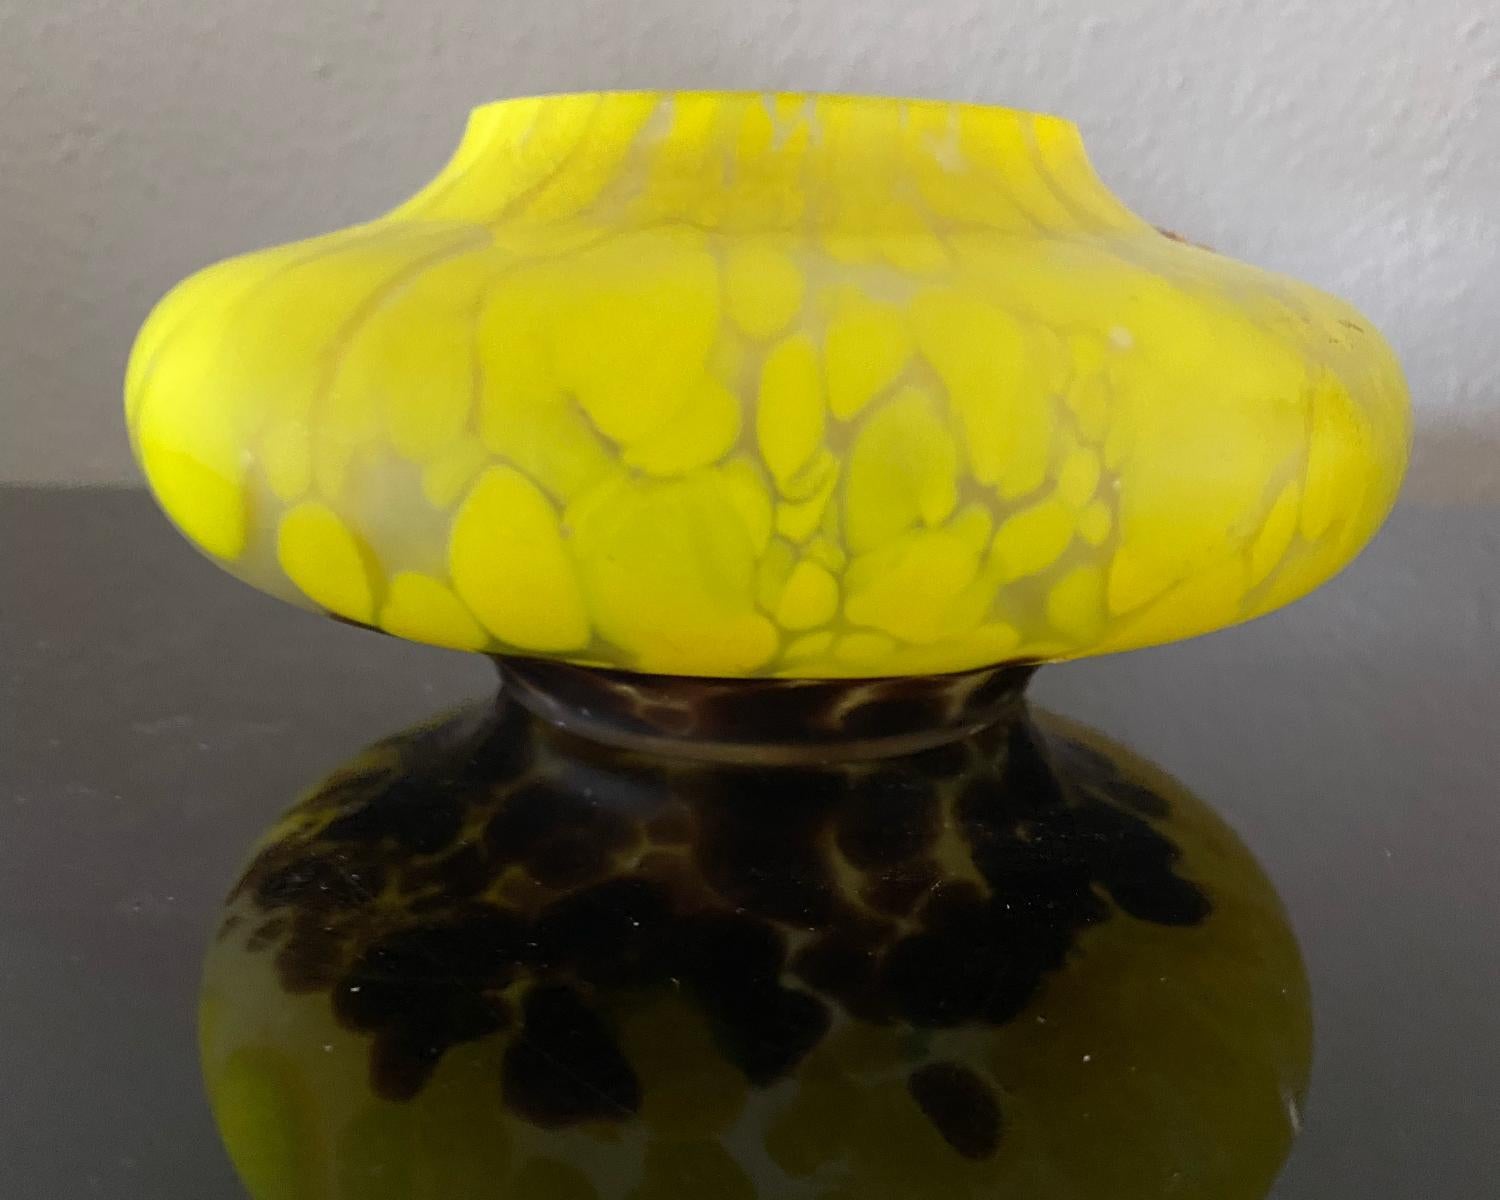 European Art Deco Glass Vase Yellow and Brown Stains or Spots For Sale